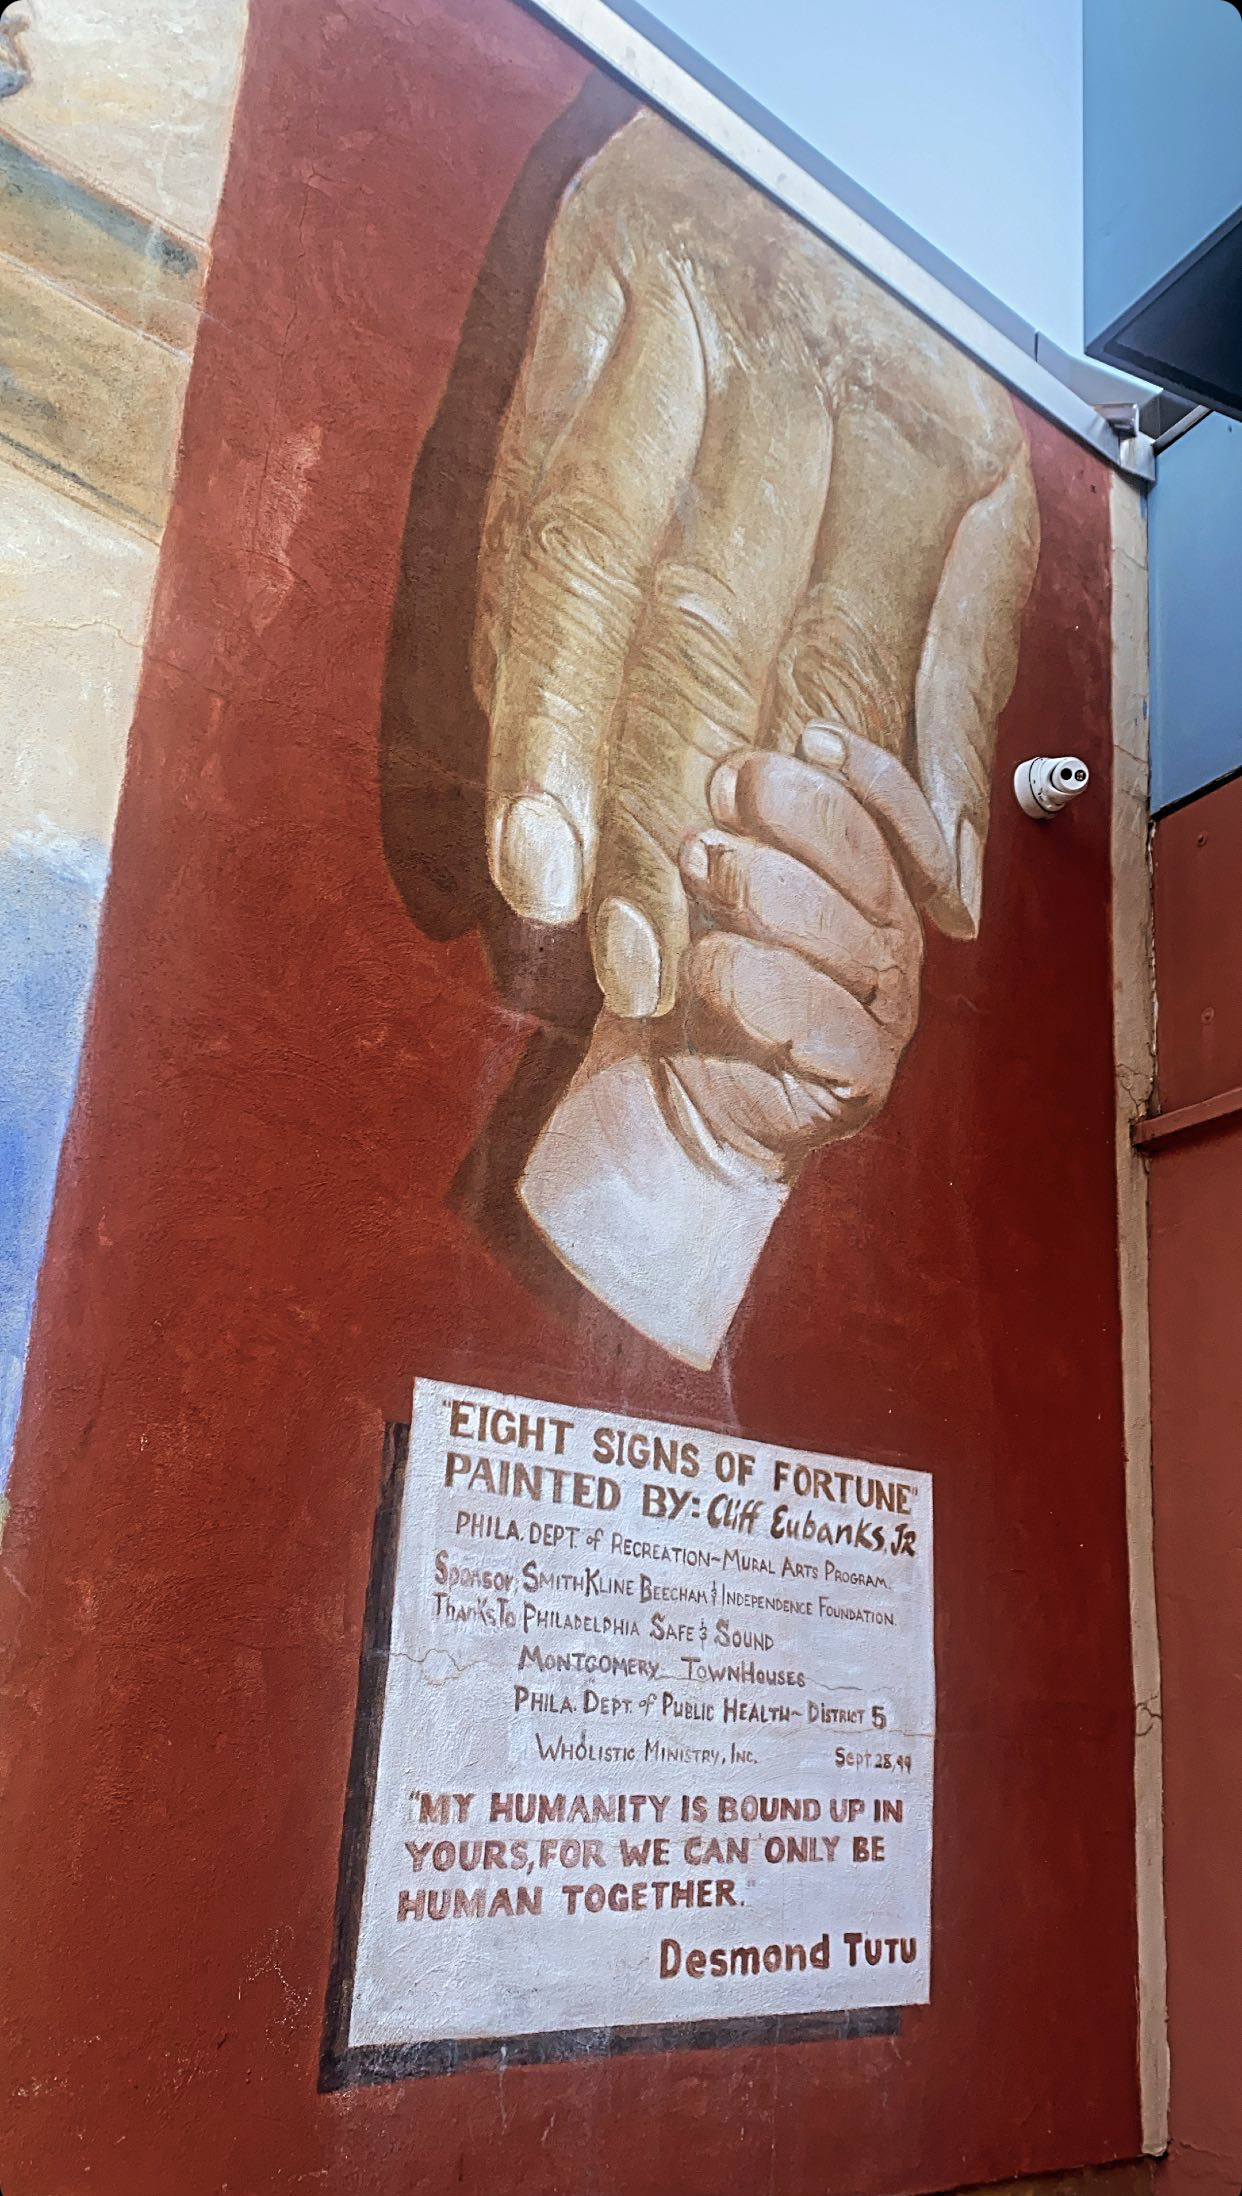 Mural of an adult hand being grasped by a childs hand on a red wall. Under the image is text, some illegible, but the last line is a quote that reads "my humanity is bound up in yours, for we can only be human together" - Desmond Tutu